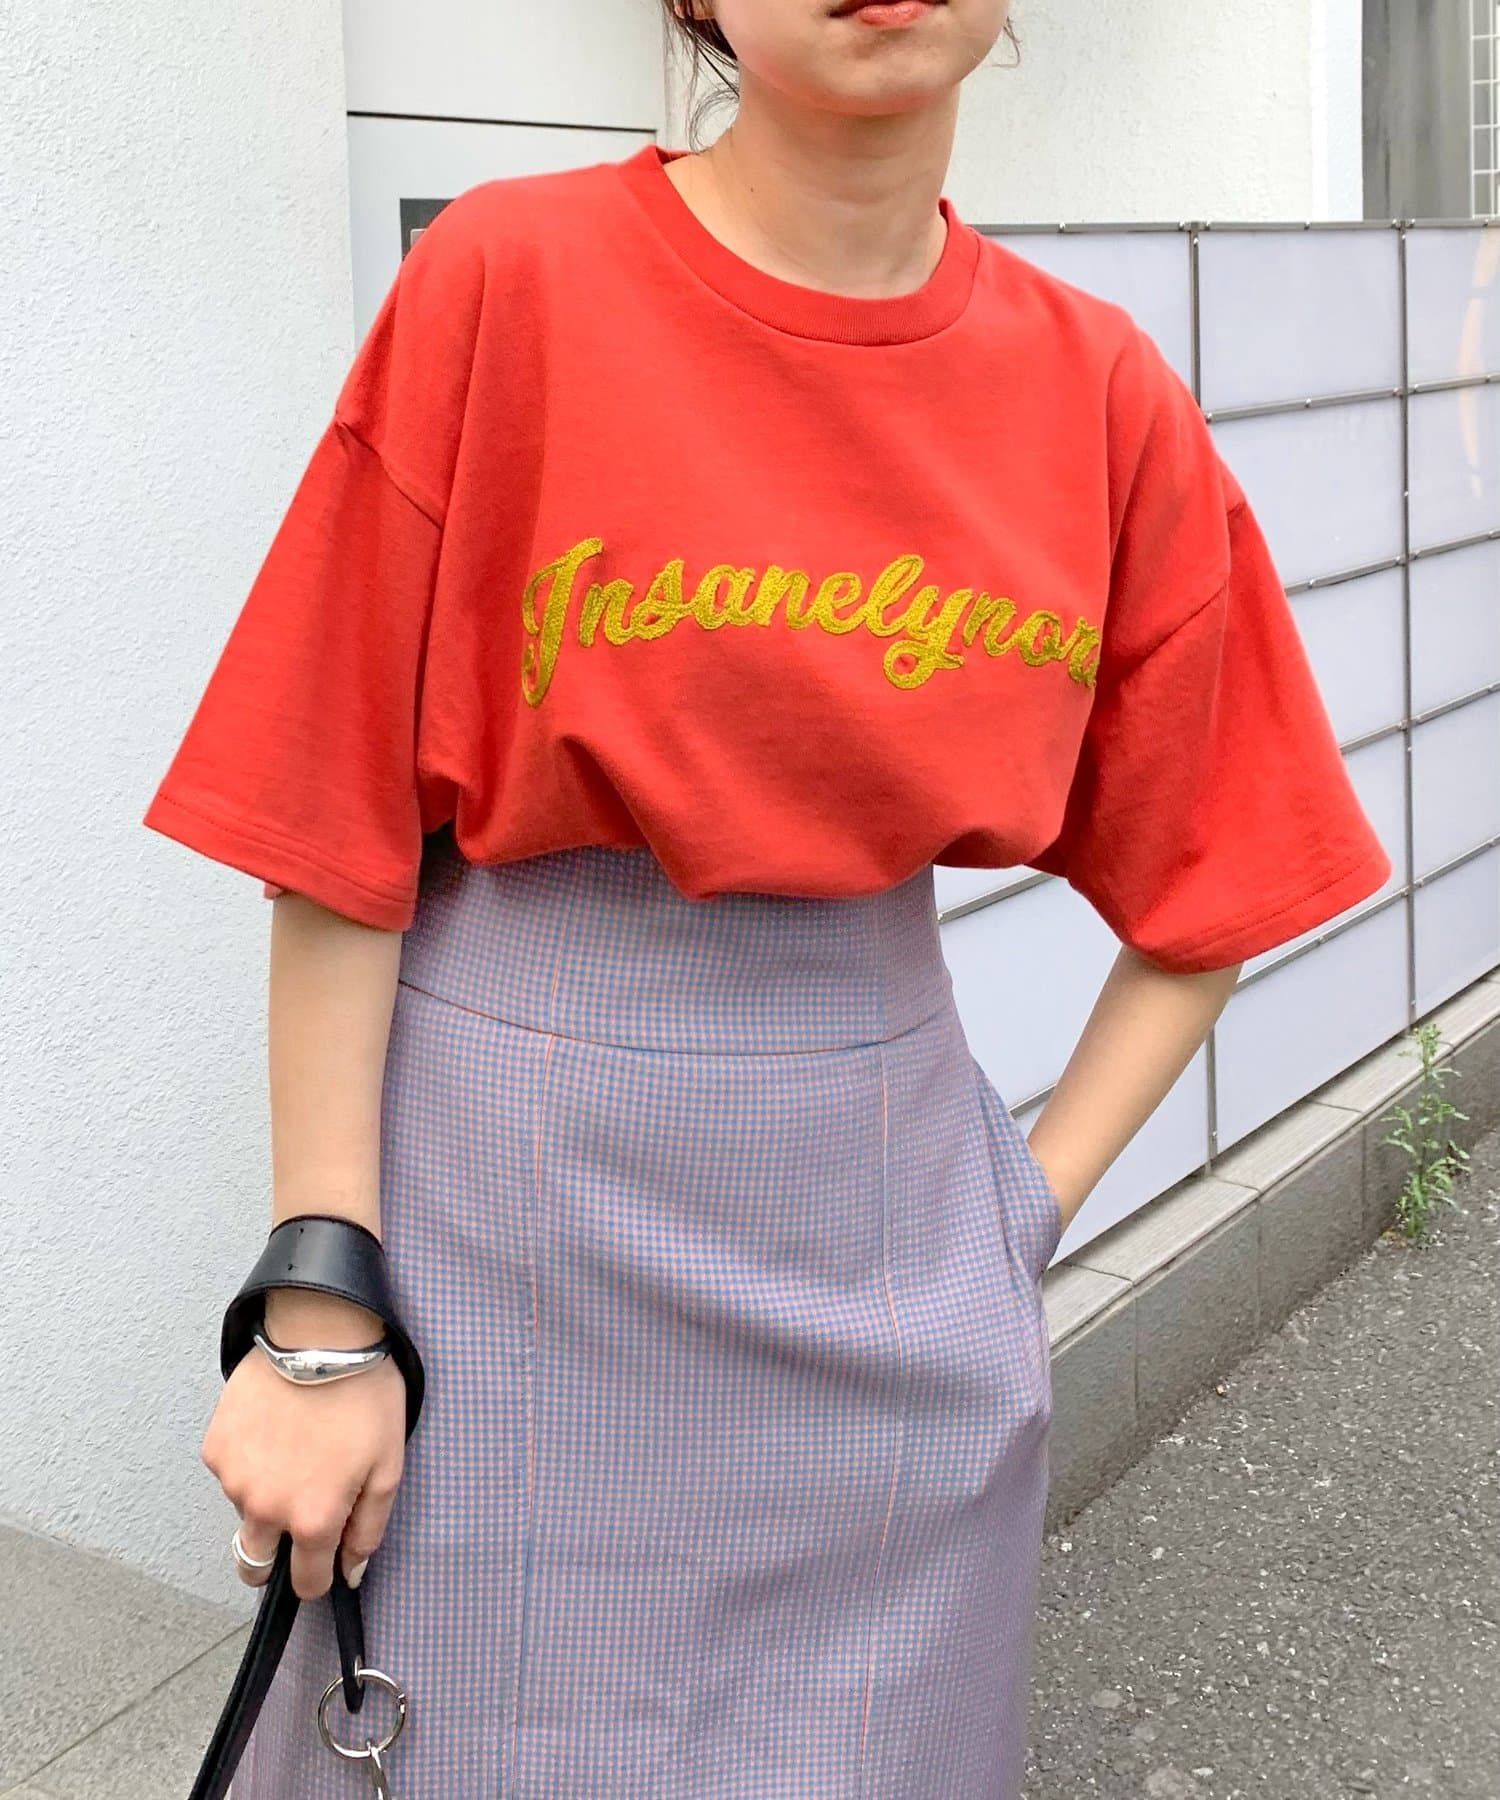 KOOKY'N/クーキー】チェーンステッチTEE | WHO'S WHO gallery 